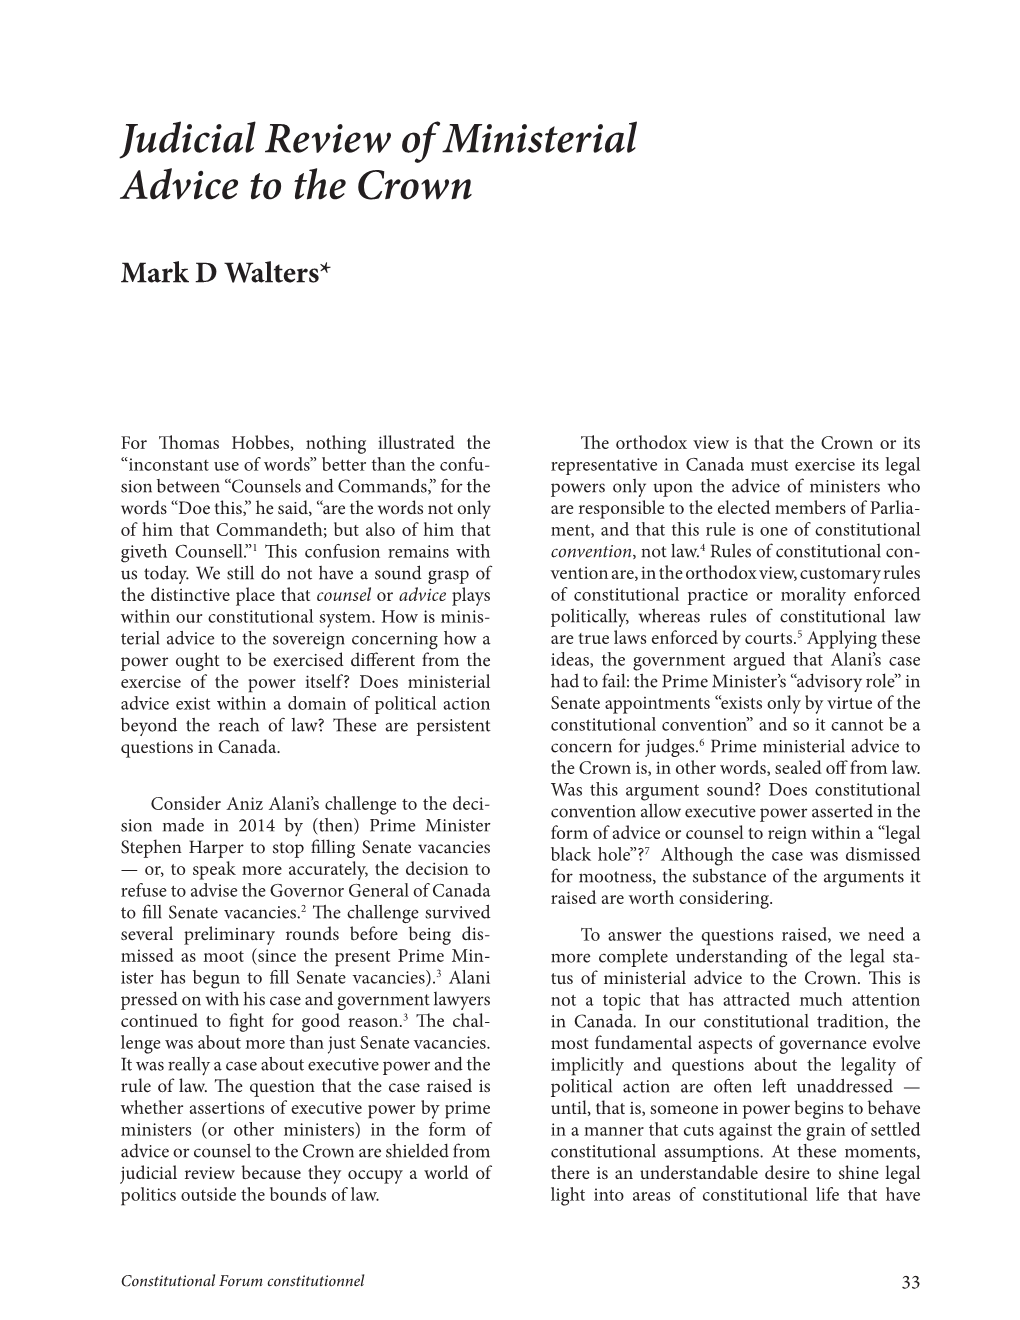 Judicial Review of Ministerial Advice to the Crown